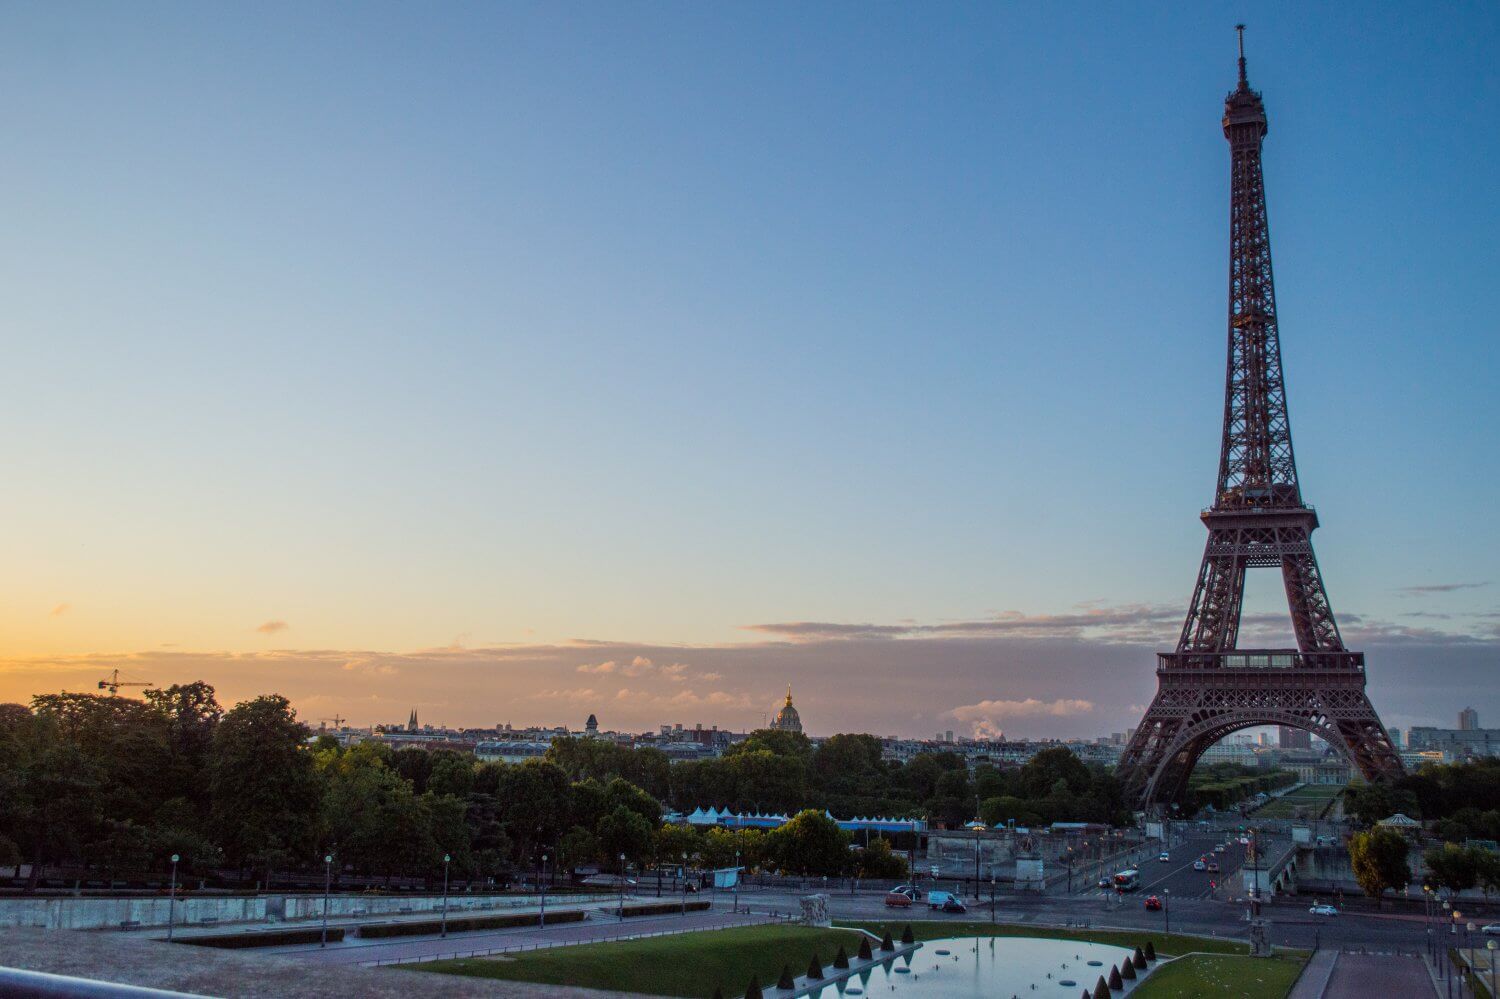 The iconic Eiffel Tower, one of the most important Paris landmarks